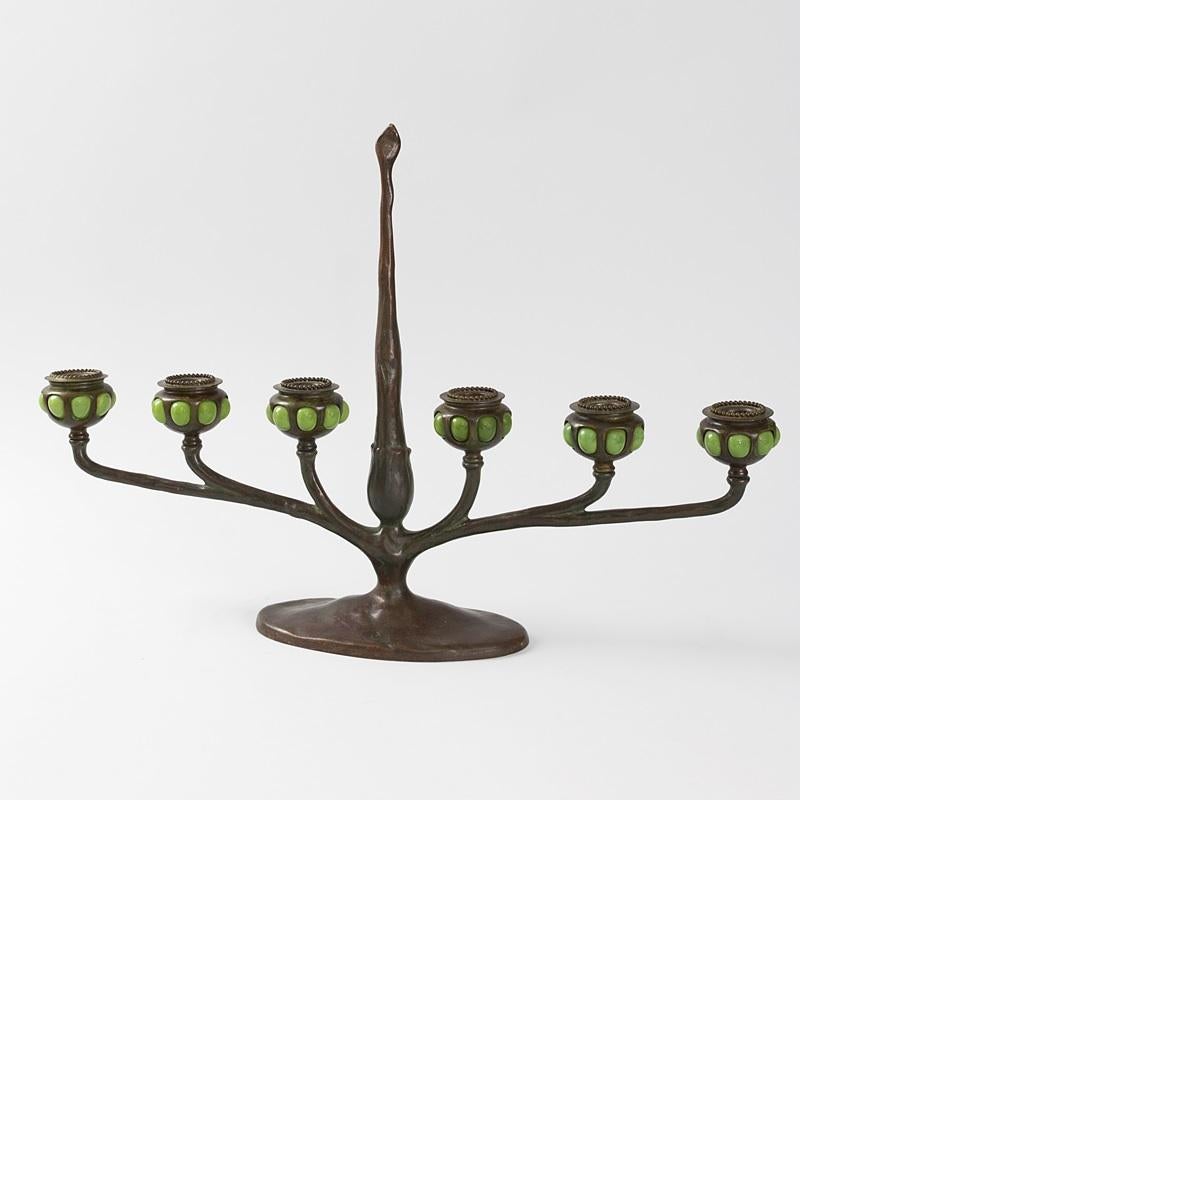 An American Art Nouveau patinated bronze and favrile glass mounted table candelabrum by Tiffany Studios New York. The candelabrum has six arms. Each candle holder is decorated with green favrile jewels. Circa 1910. A similar candelabrum is pictured